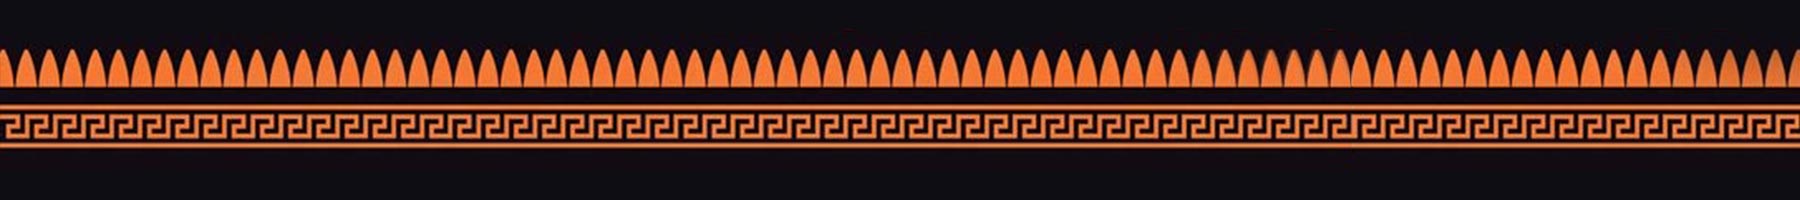 patterns in the style of classic Greek vases